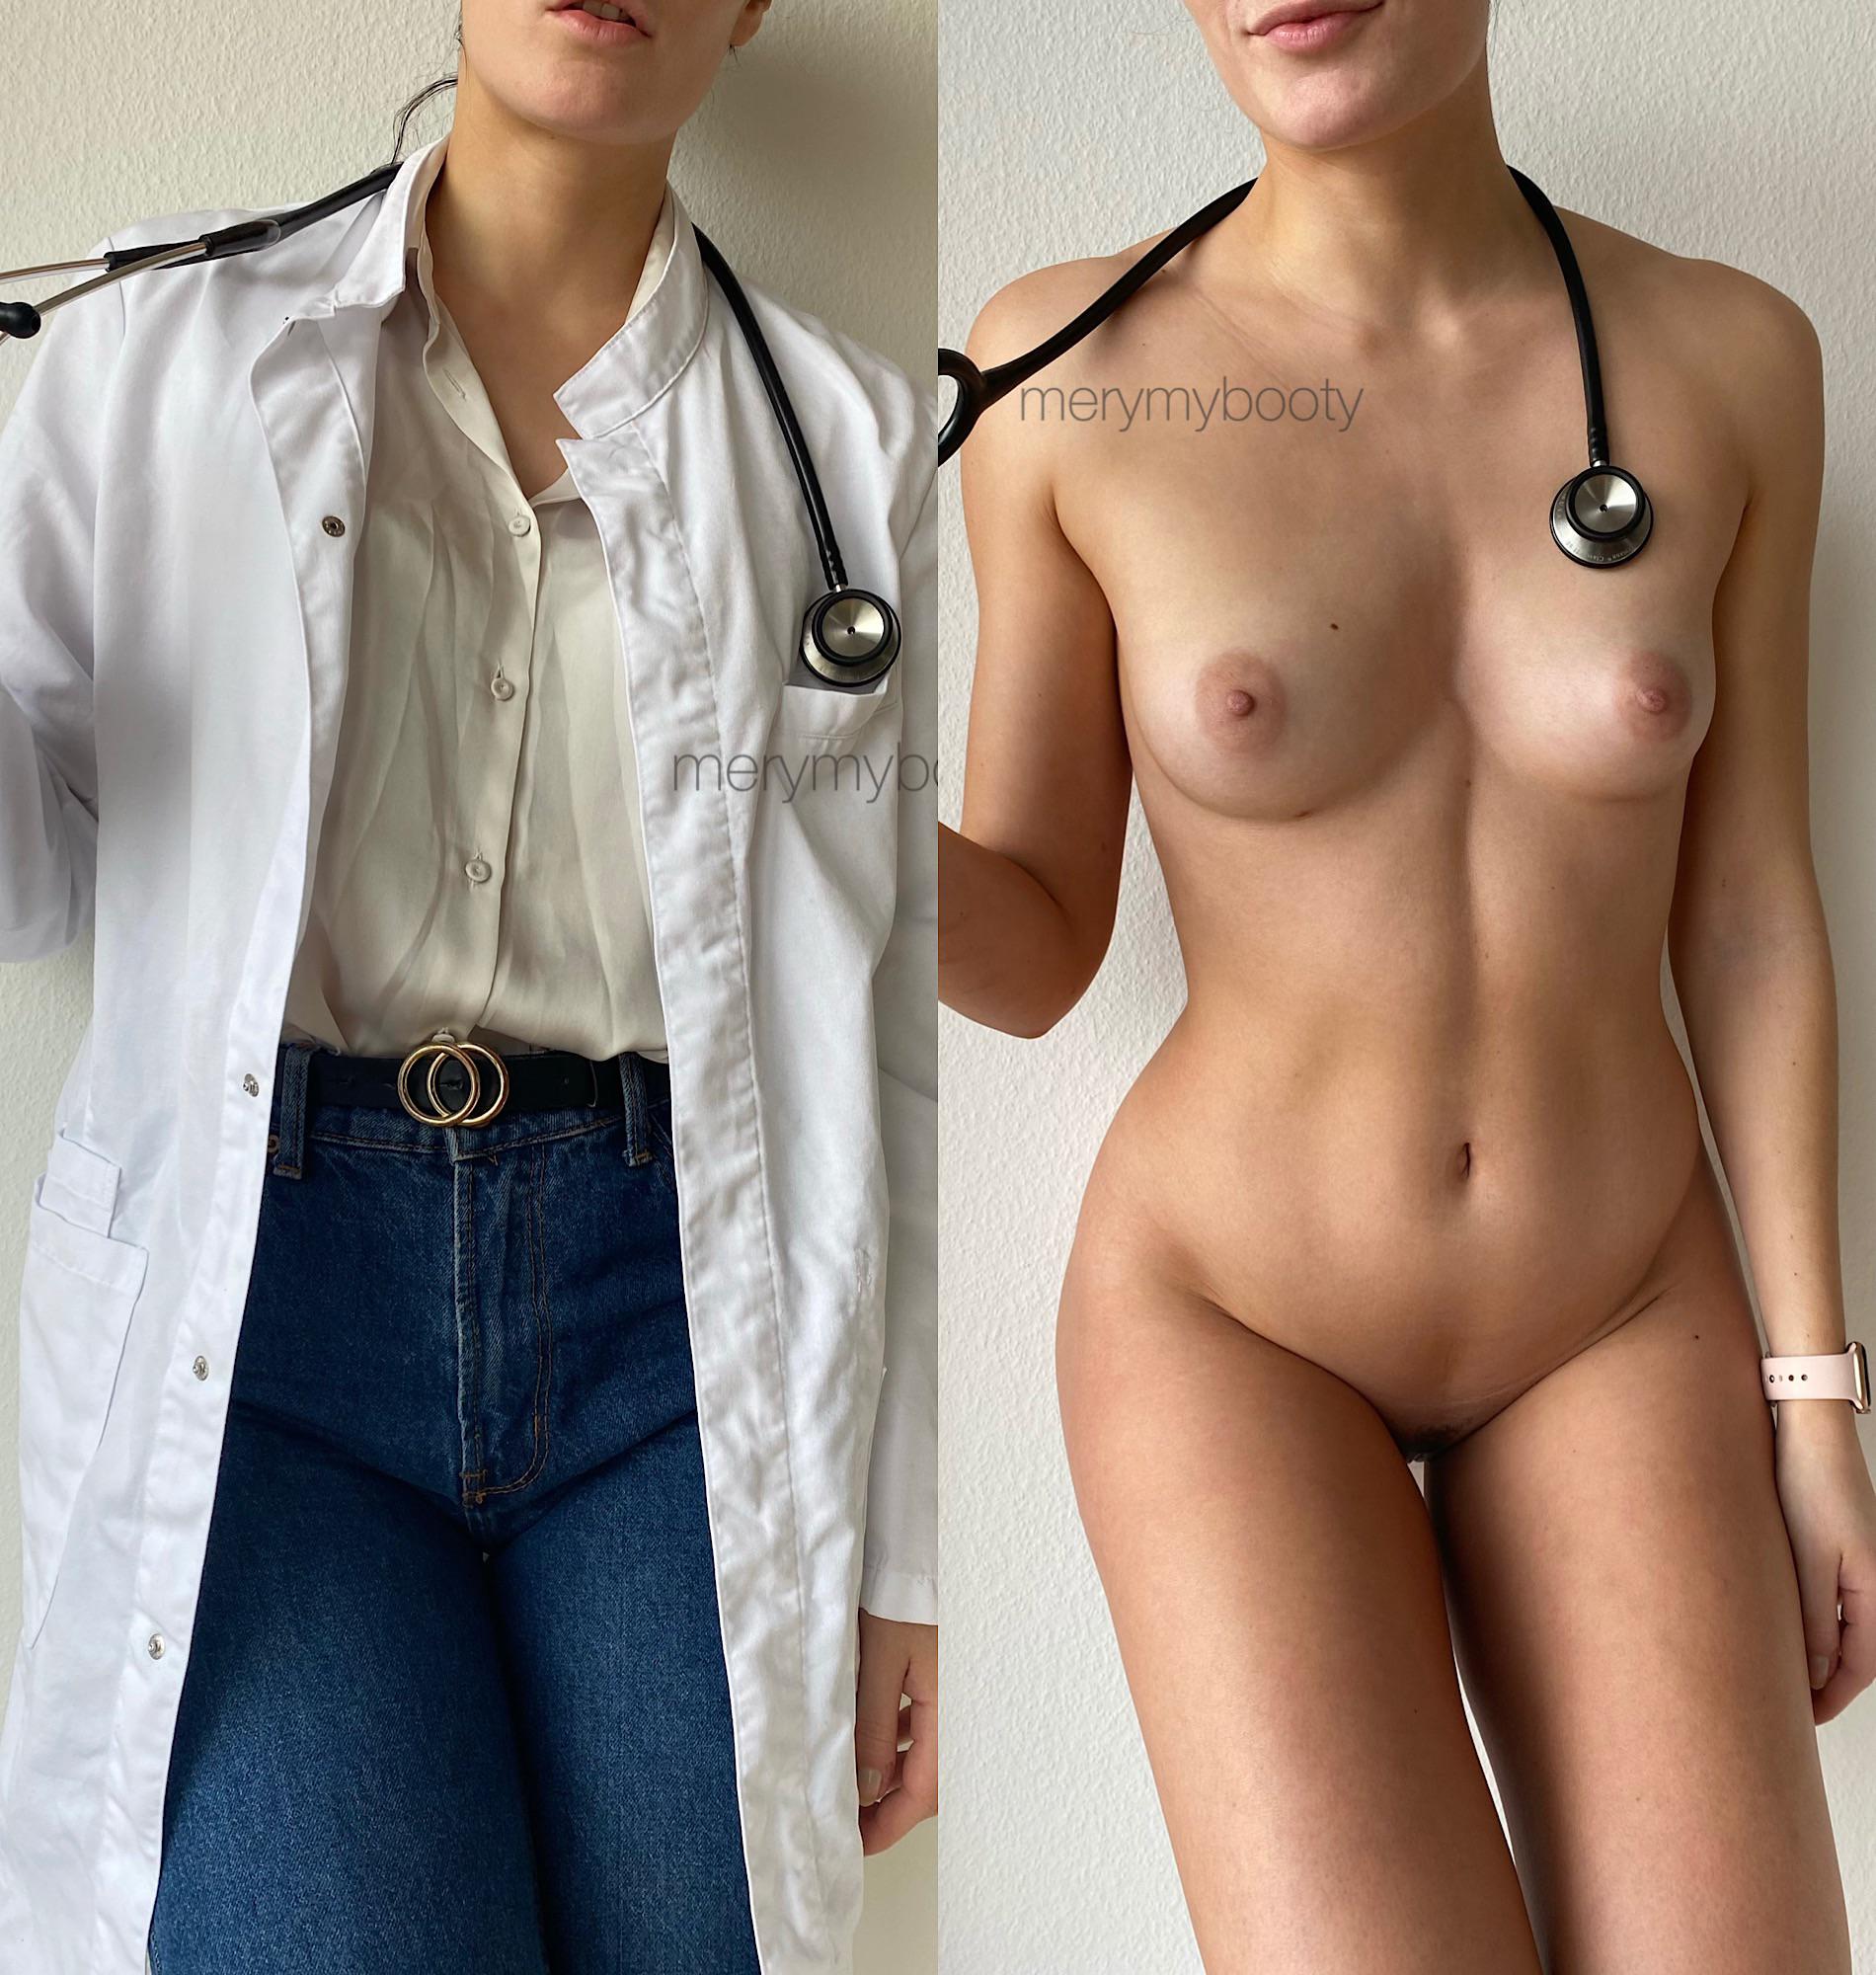 If you were wondering how your future doc looks underneath. So would you mind being my patient ?